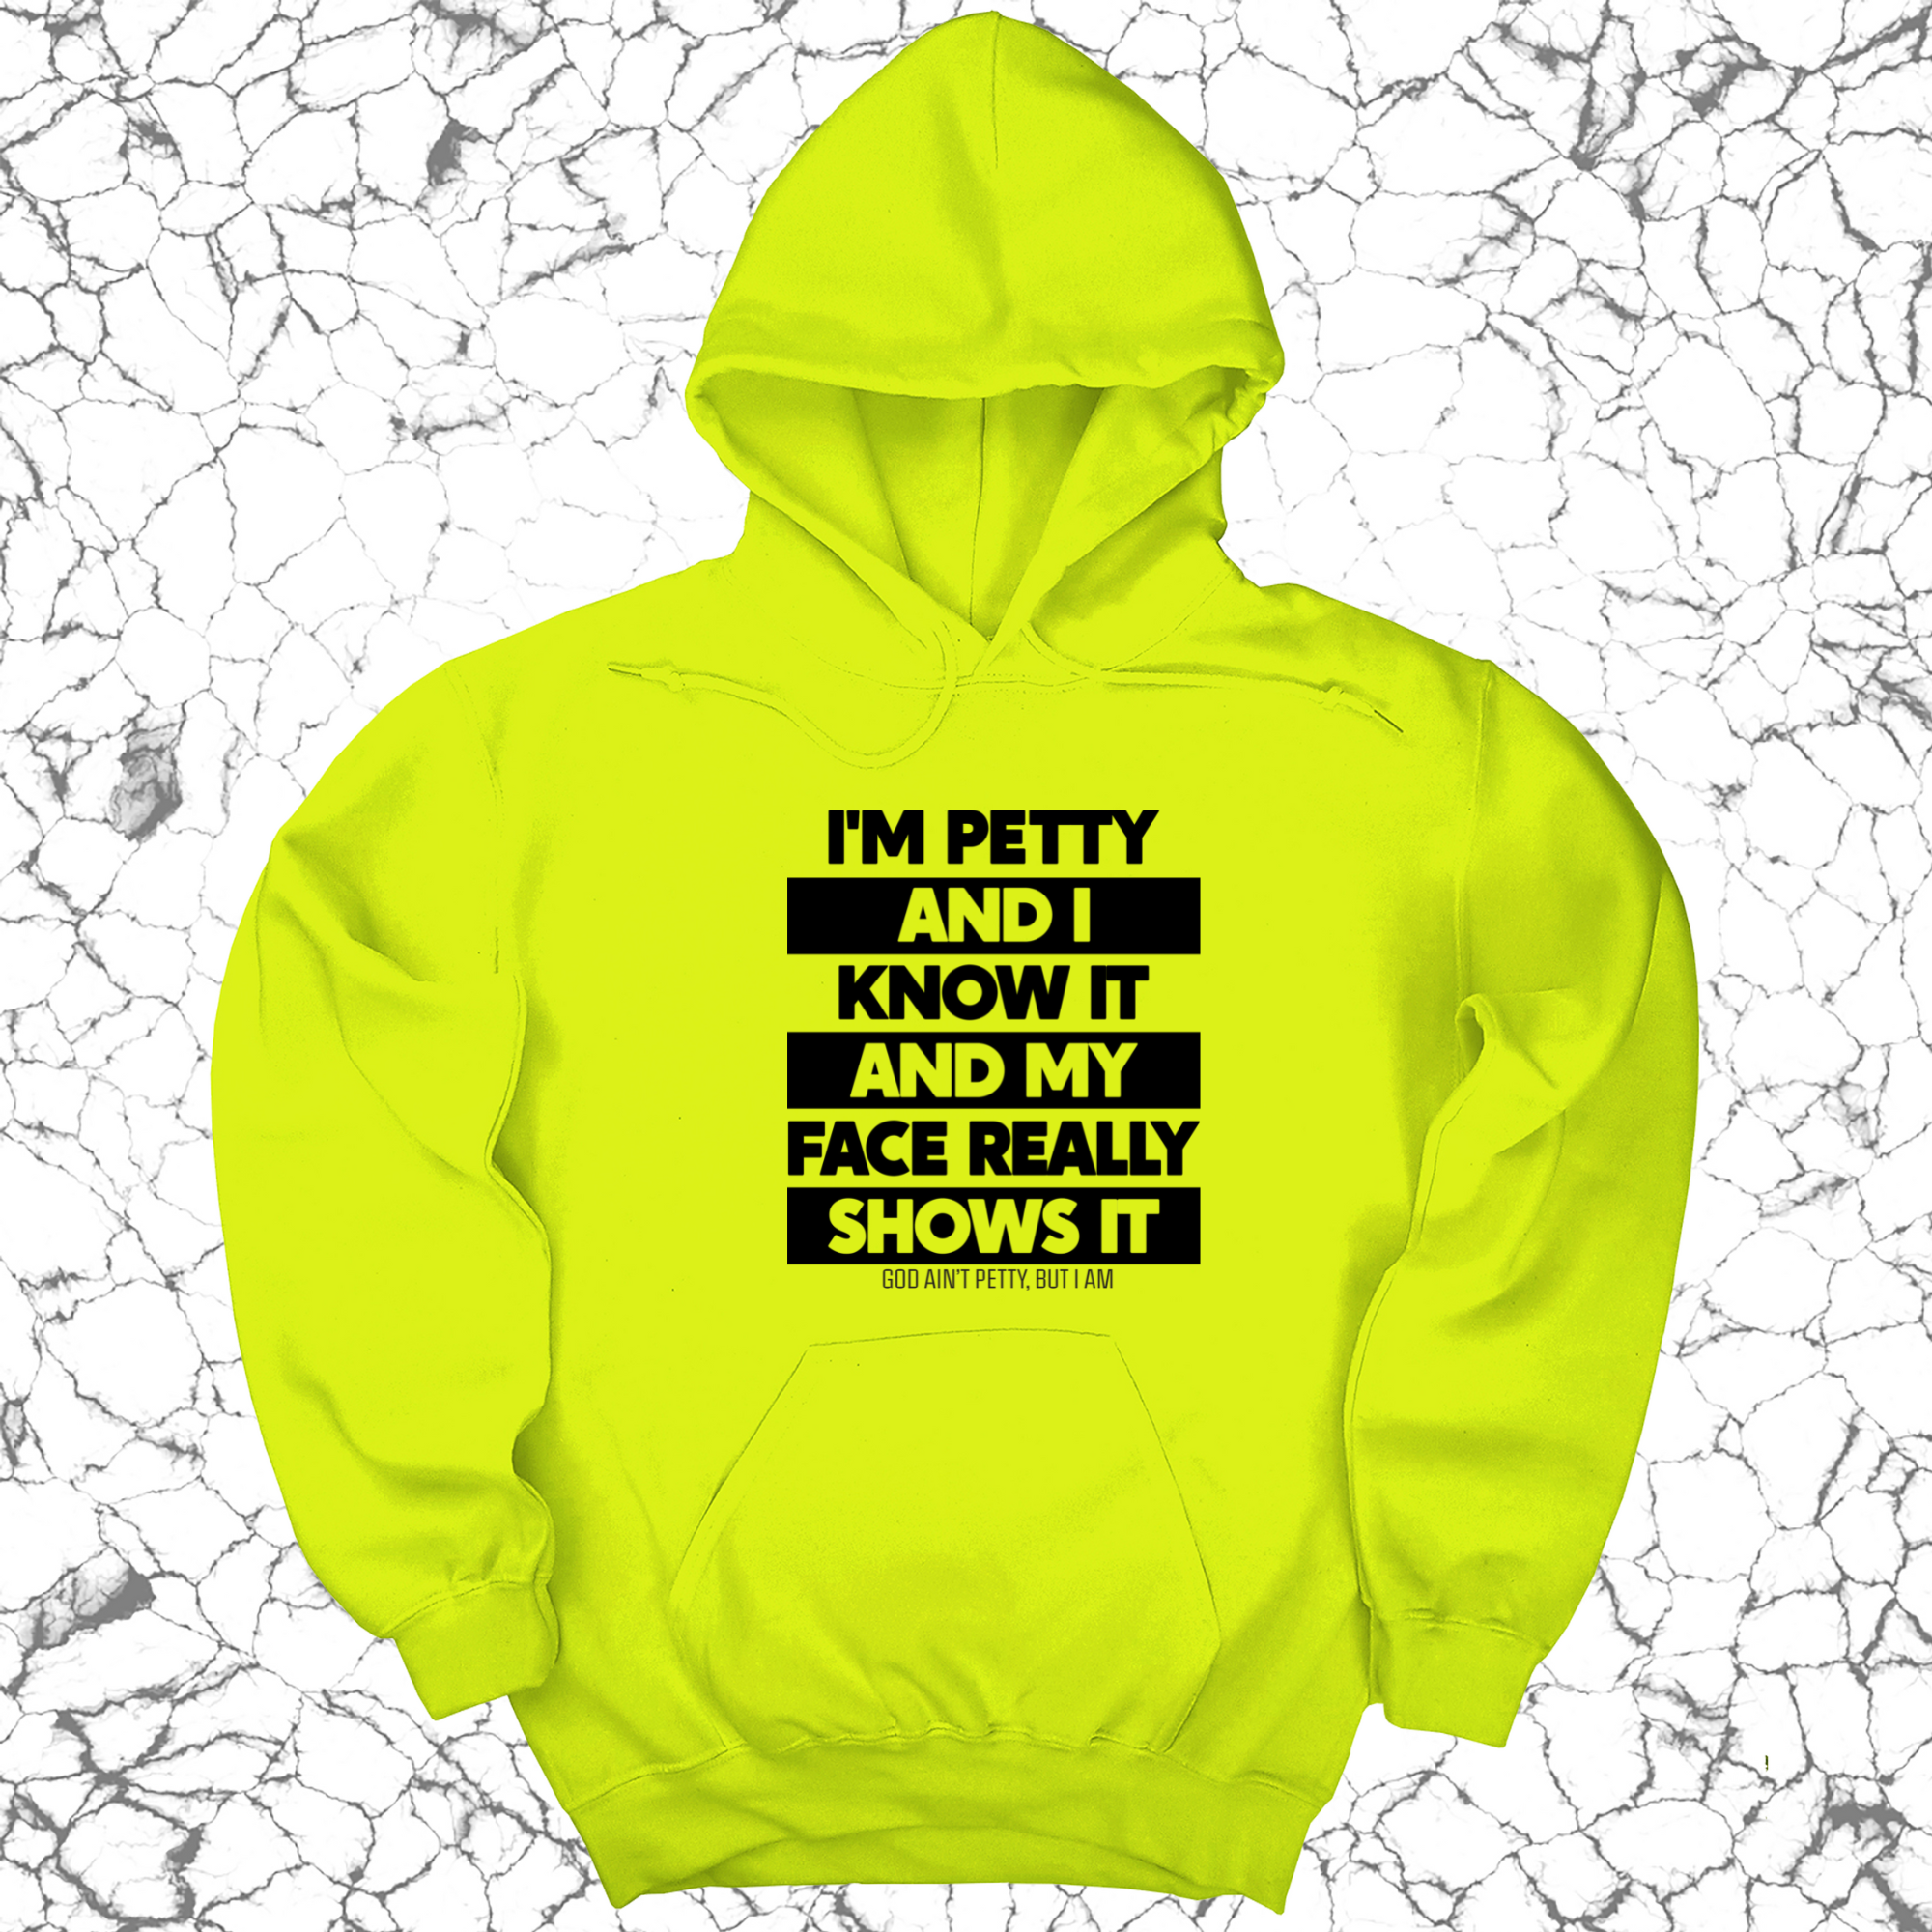 I'm petty and I know it and my petty face really shows it Unisex Hoodie-Hoodie-The Original God Ain't Petty But I Am